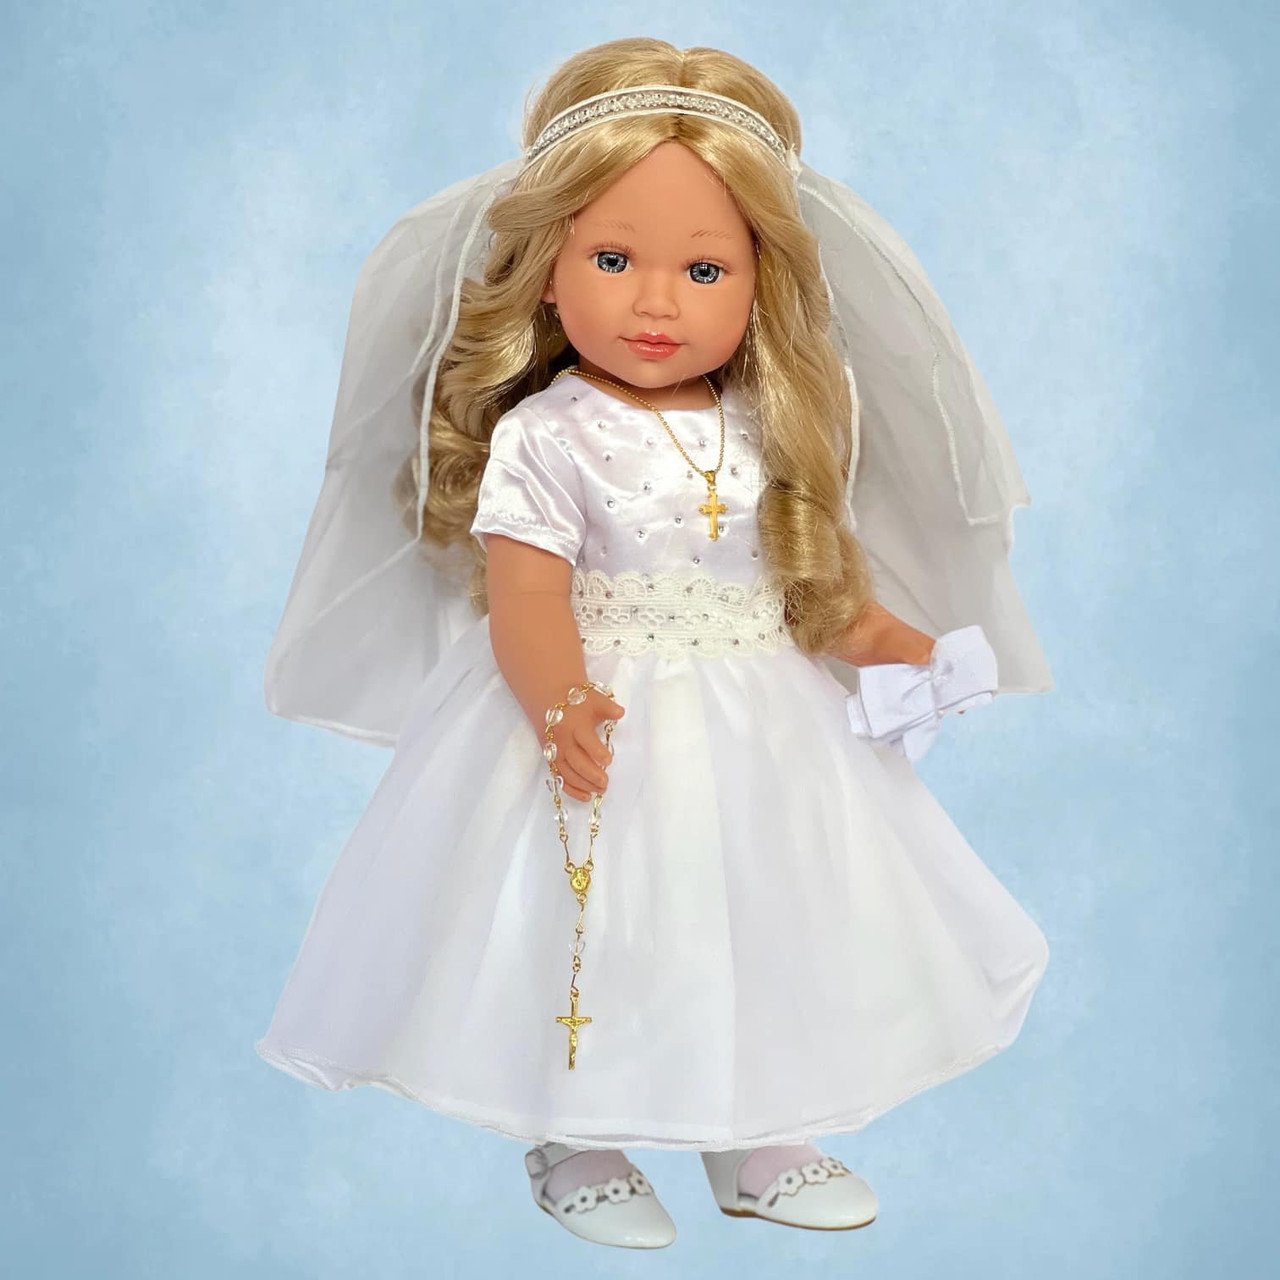 Tooth Fairy, 18-inch Doll Clothes